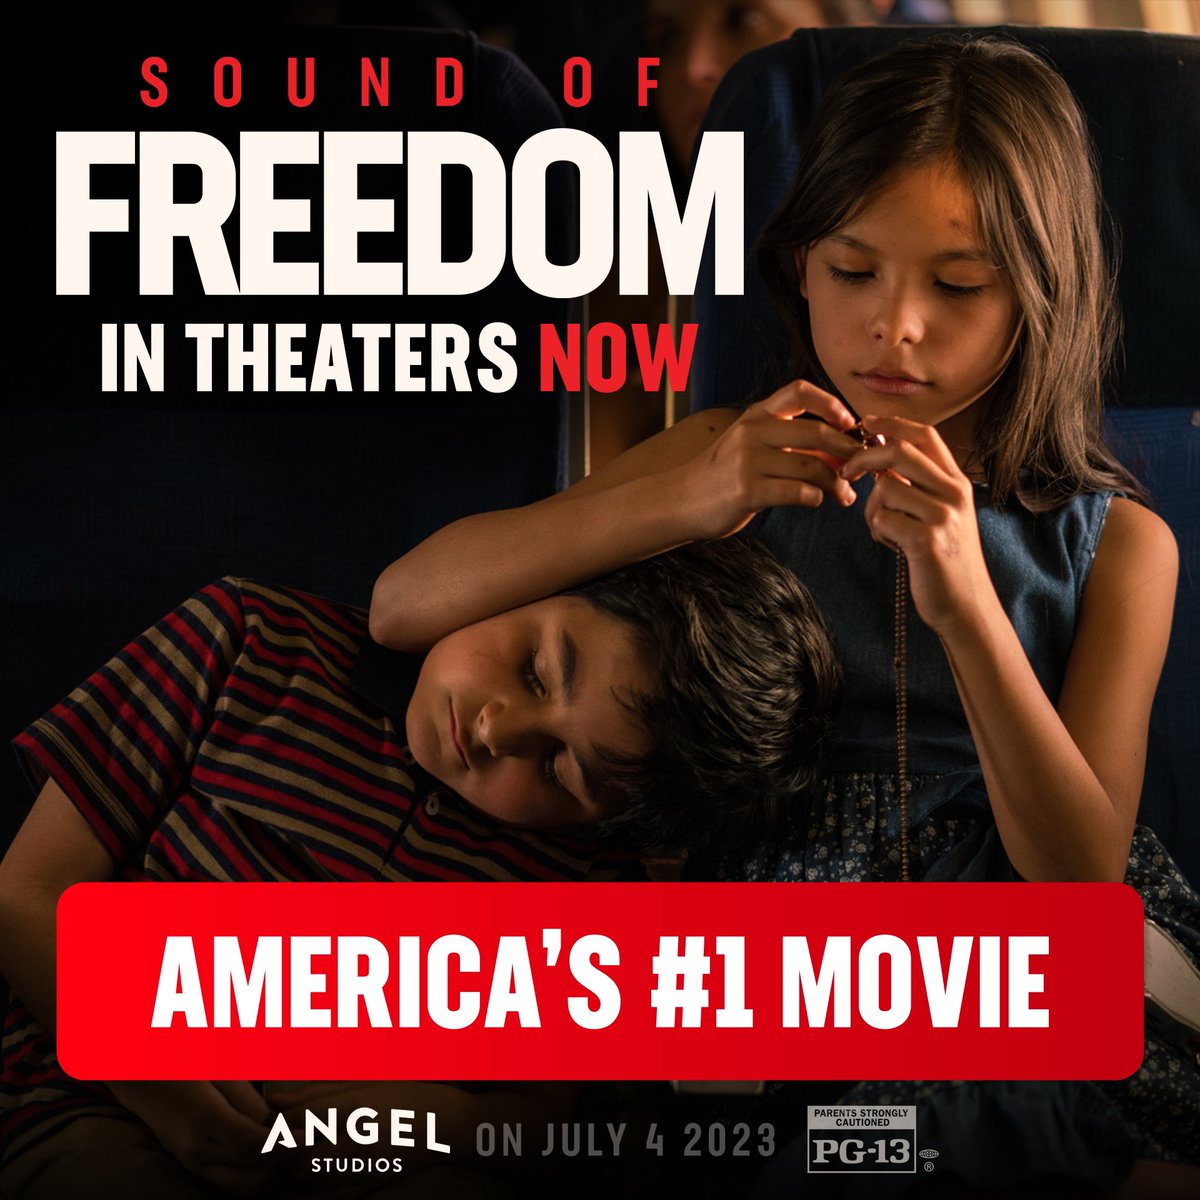 #SoundofFreedomMovie #2MillionFor2Million #AngelStudios #AmplifyLight #ShineLight It’s time to save our children, put a end to child trafficking!! bring awareness by sharing this movie!!! @SOFMovie2023 @AngelStudiosInc